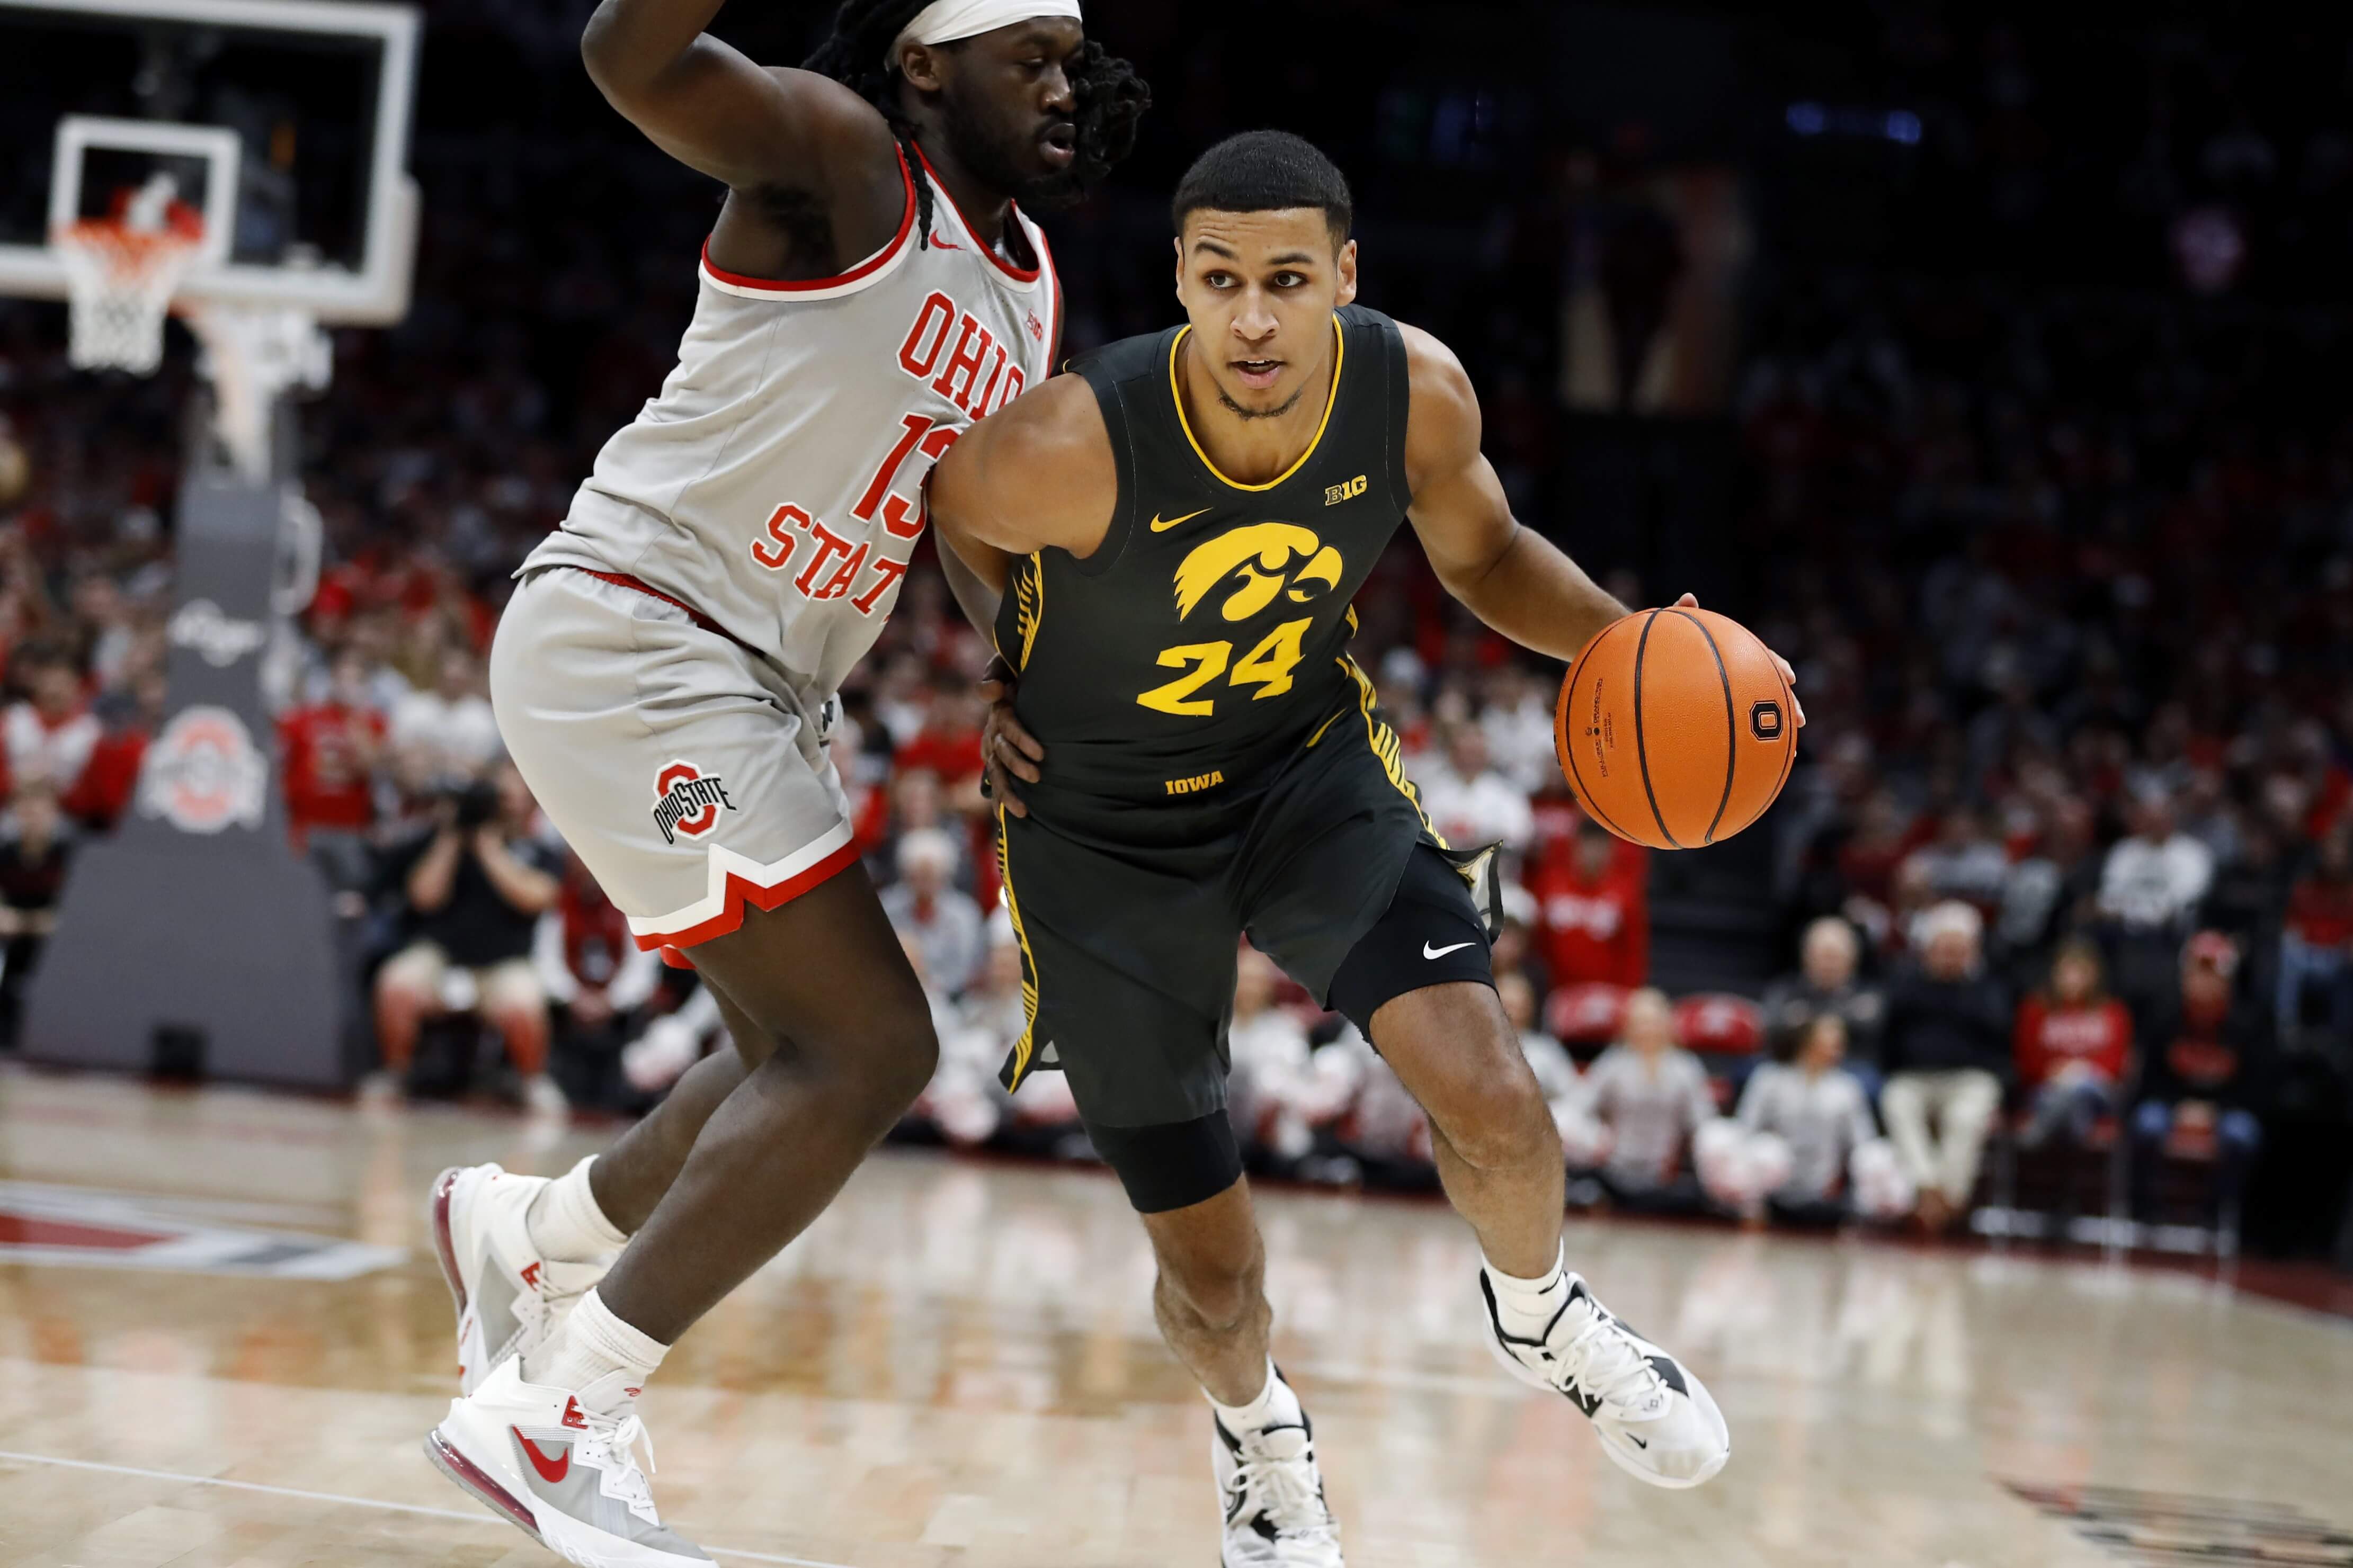 Iowa vs Michigan State Odds, Picks and Predictions: Hawkeyes Hand Struggling Spartans Another Loss